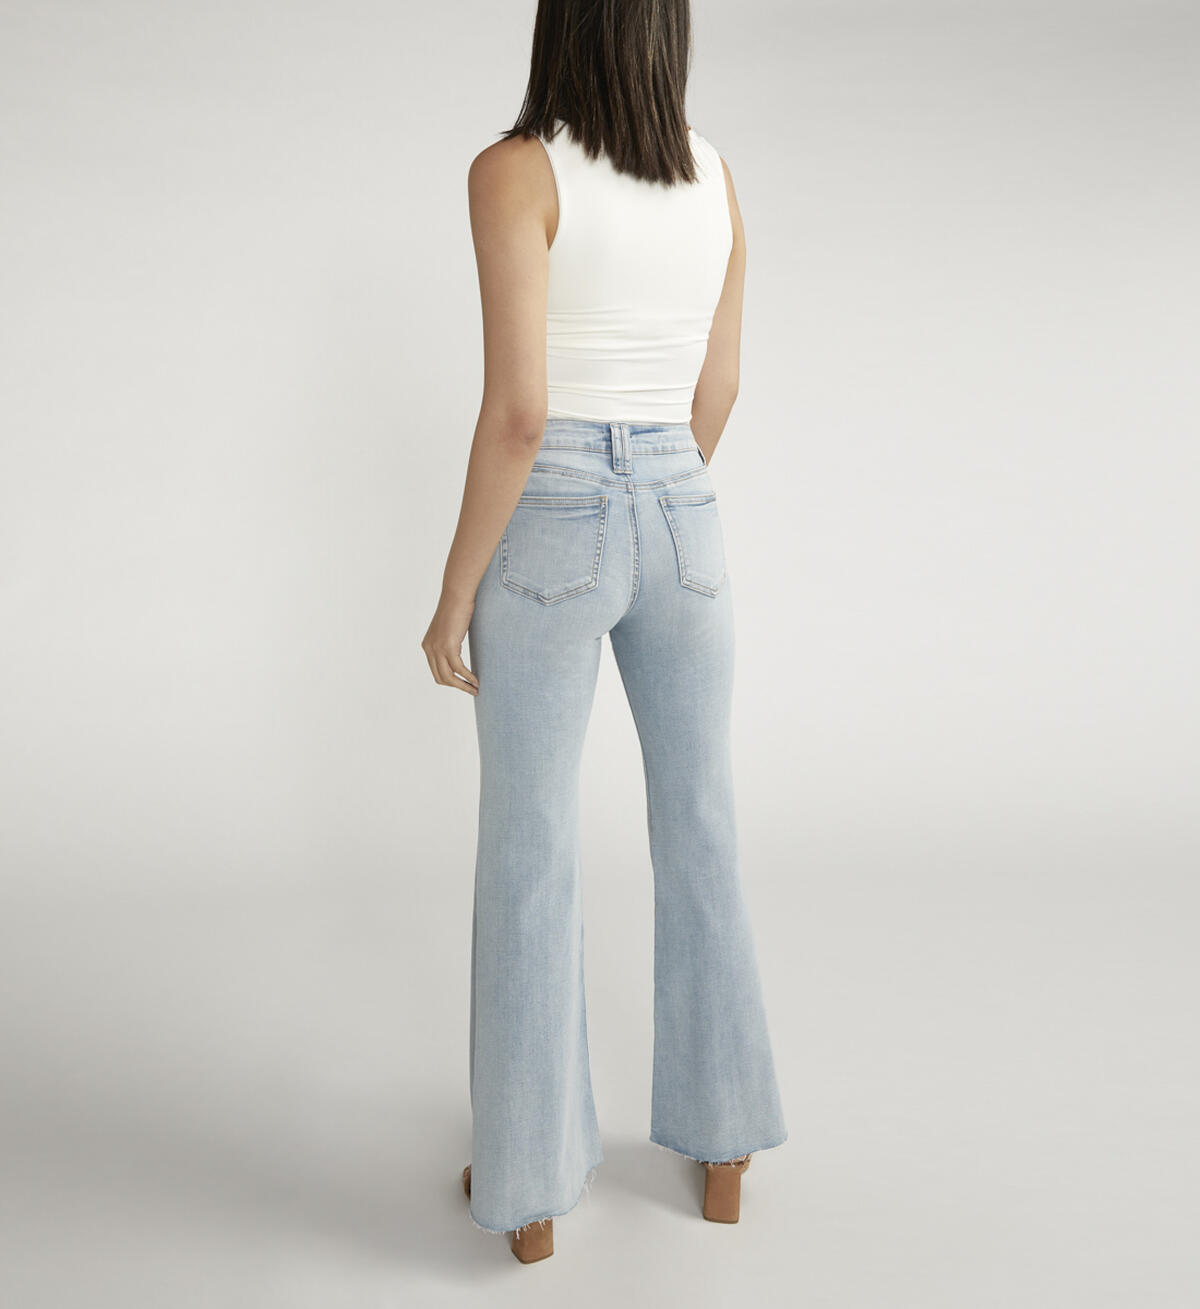 Suki Mid Rise Flare Jeans, , hi-res image number 1